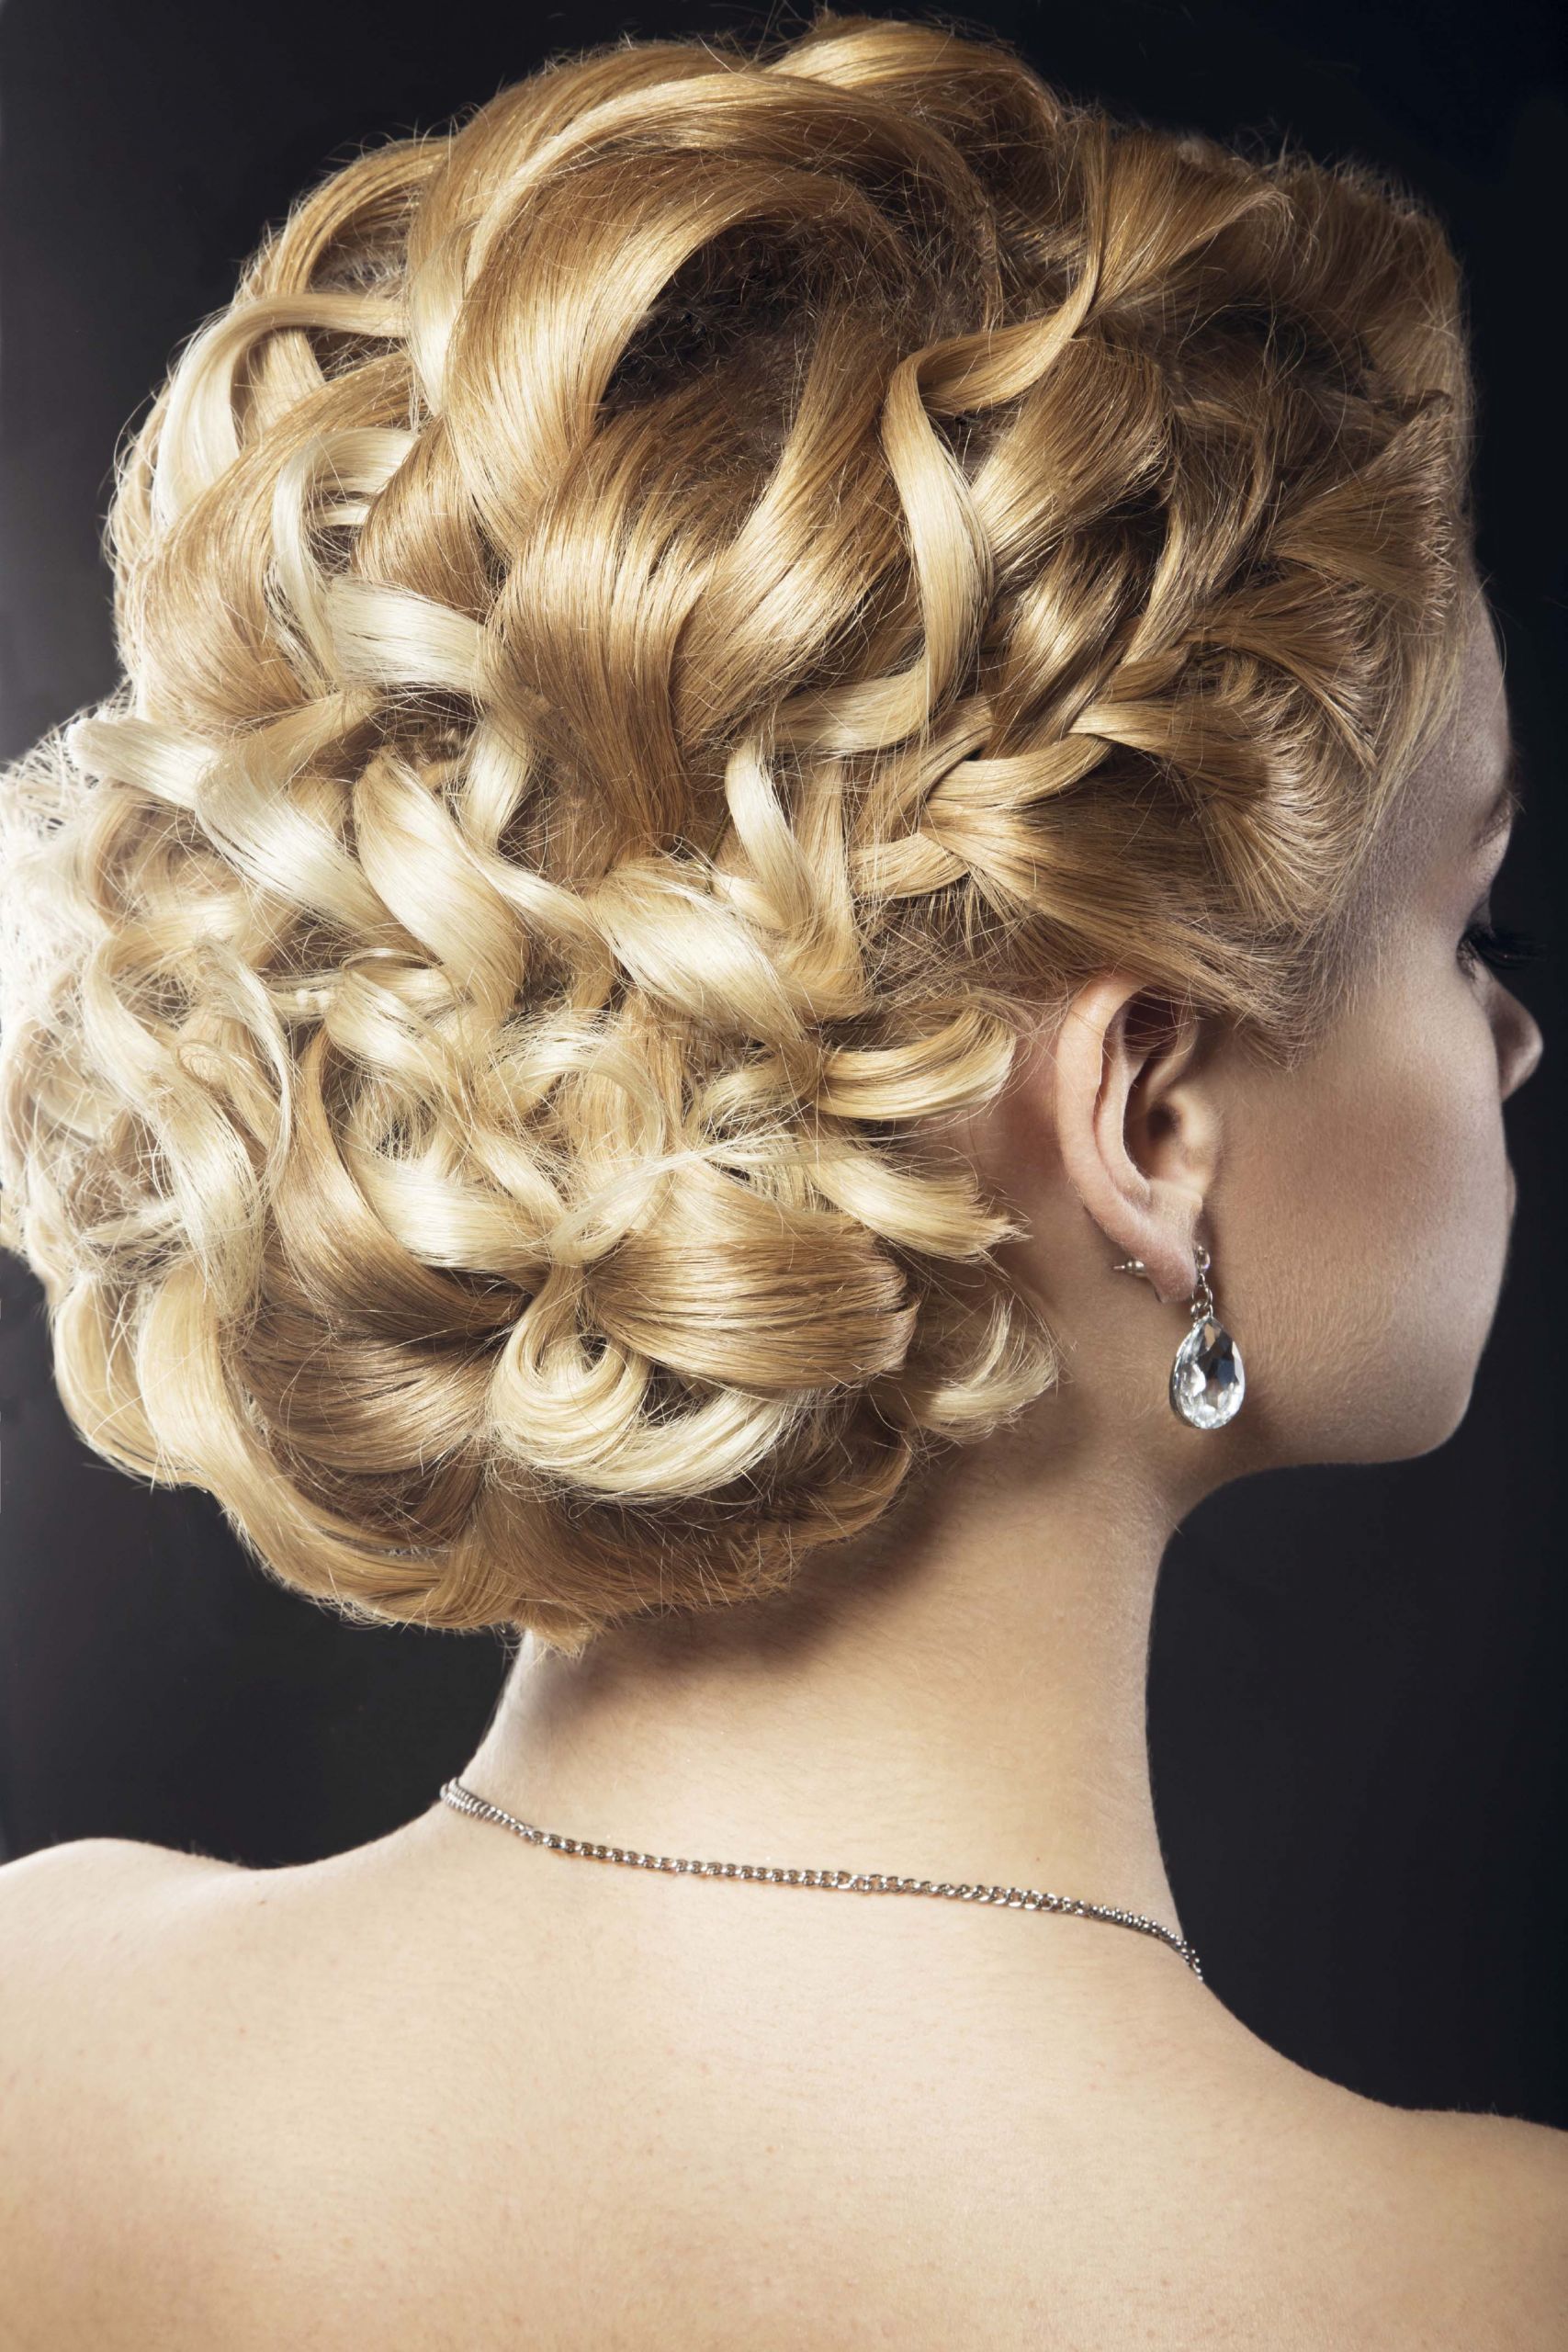 Curled Hairstyles Updo
 9 Spring Wedding Updos for Curly Hair